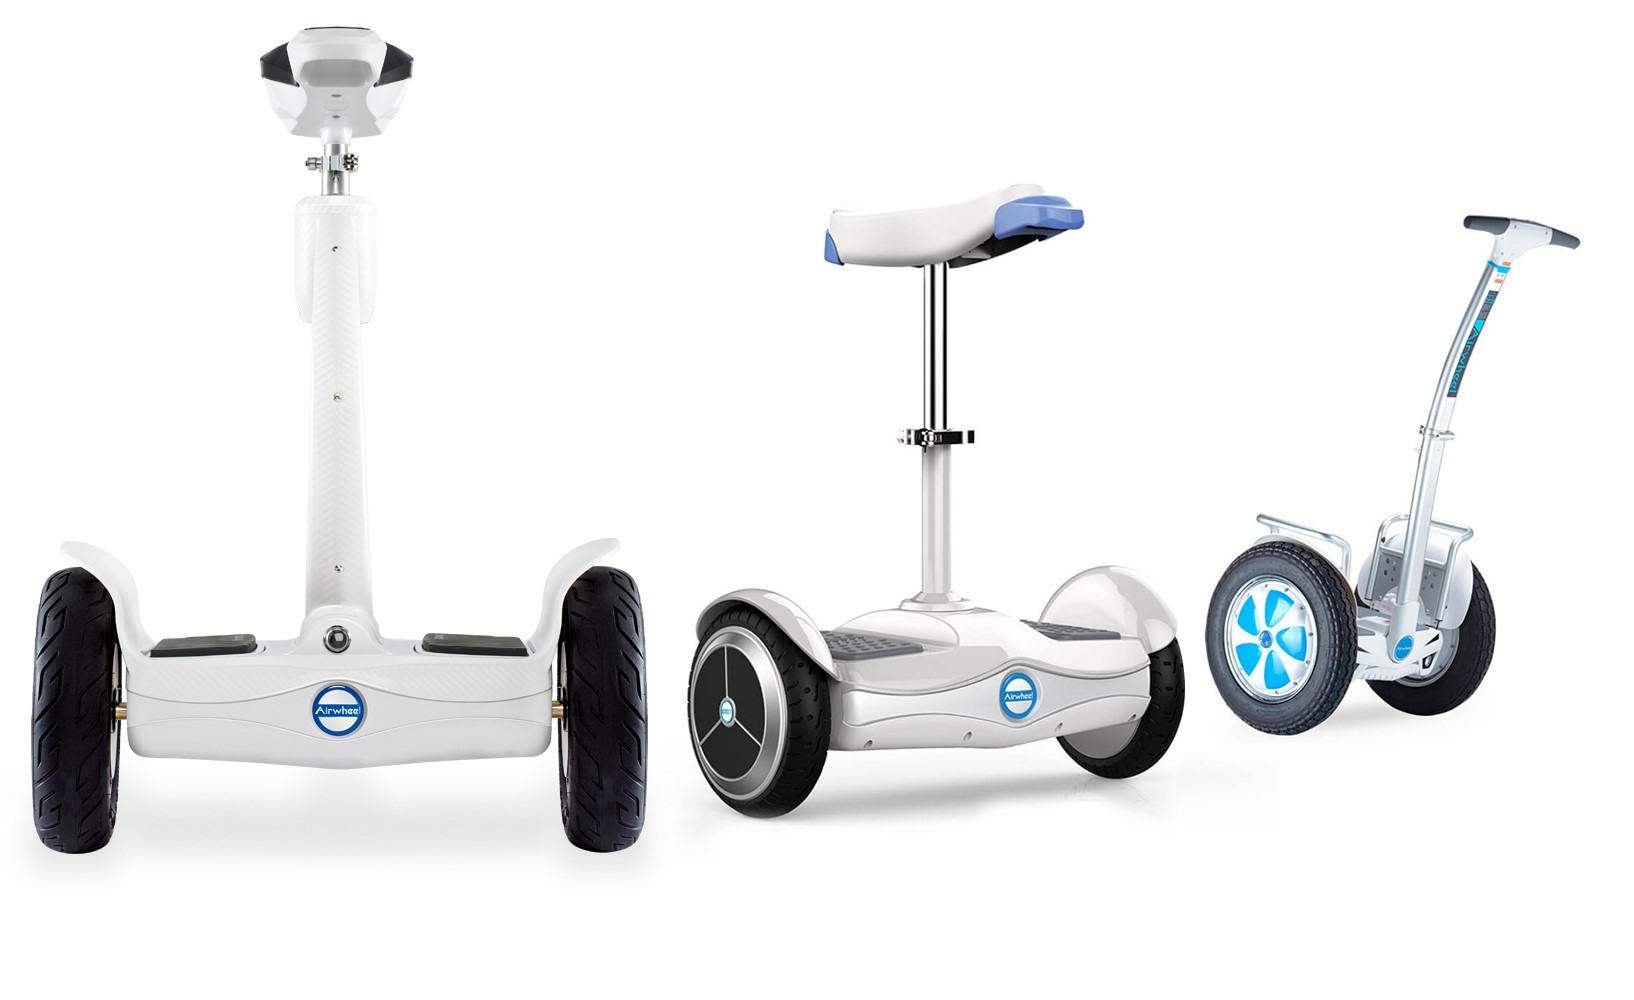 Airwheel S8 sitting-posture electric scooter